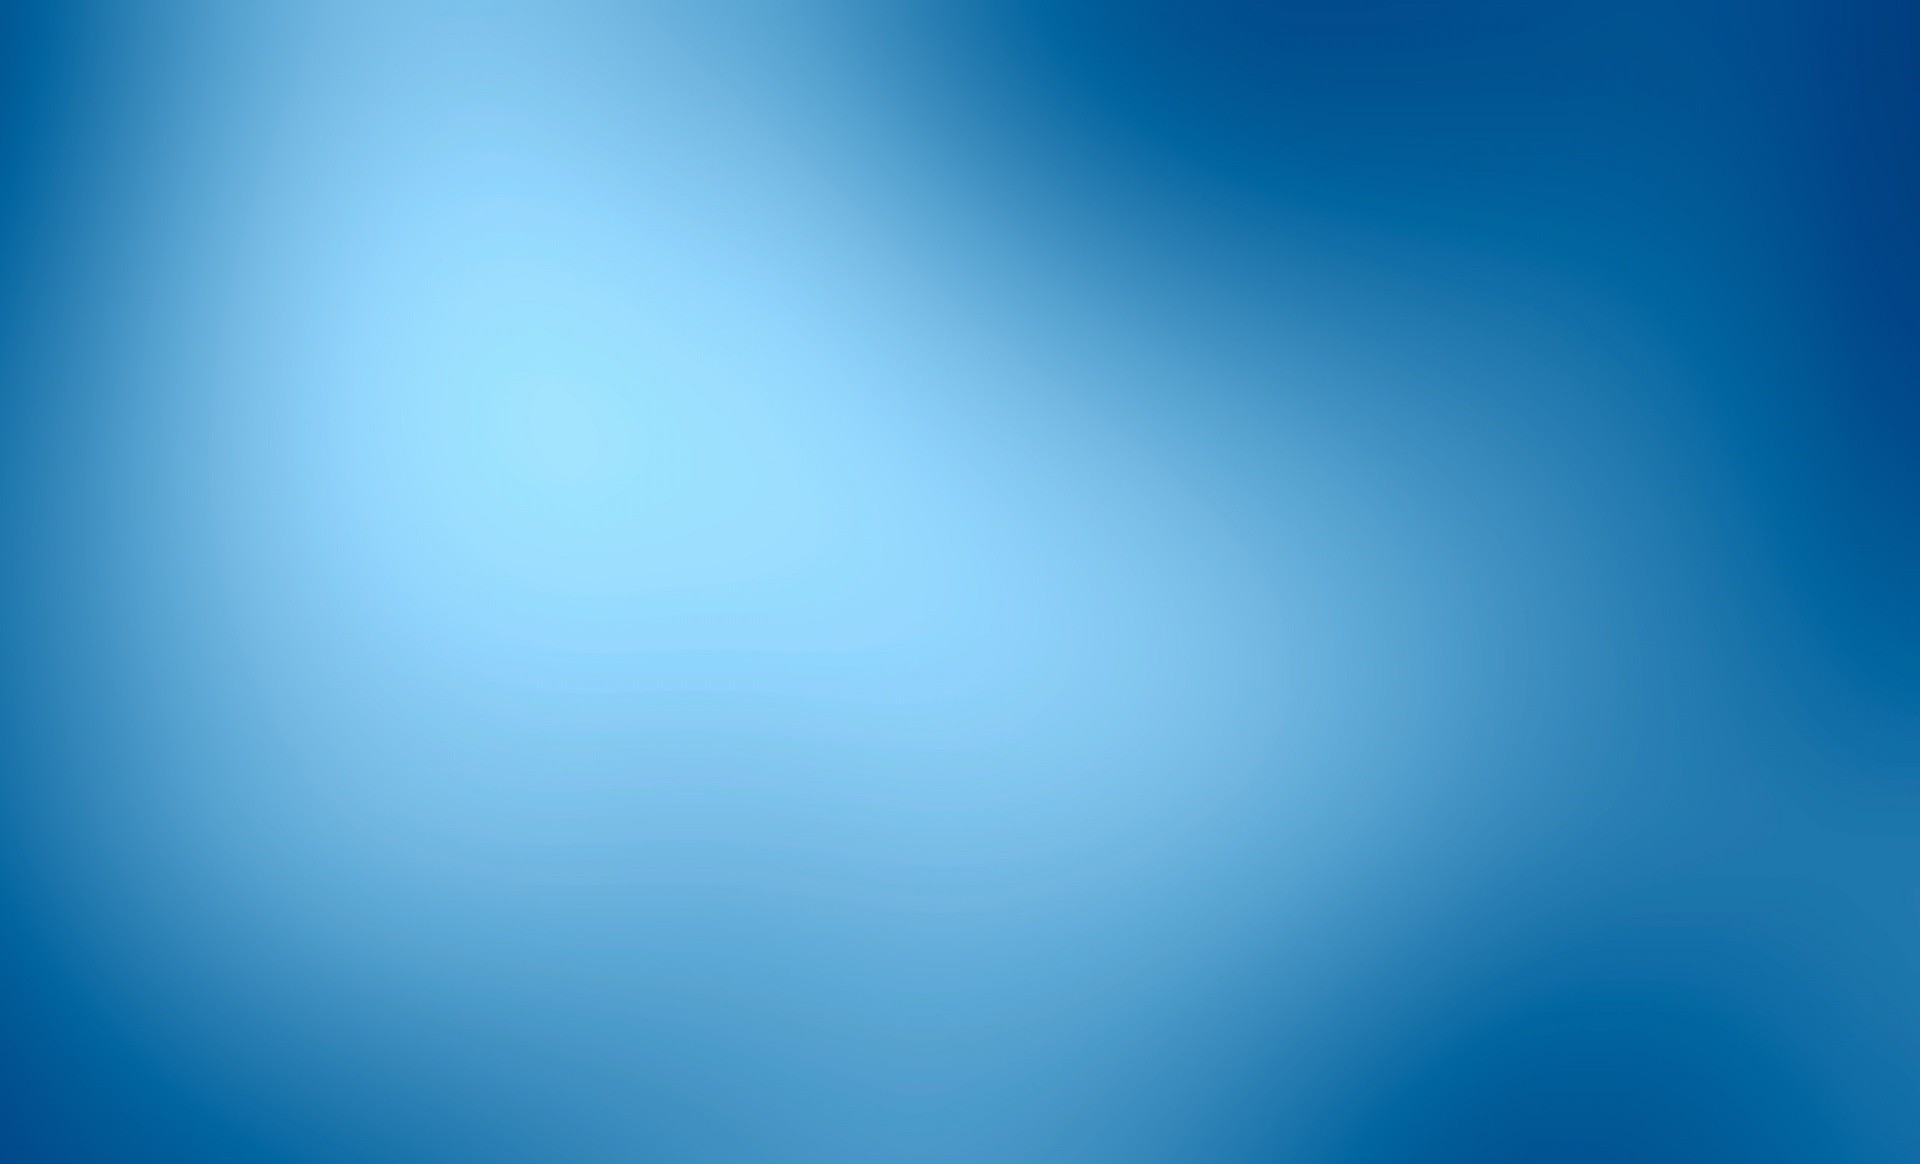 Simple Blue Background Wallpaper High Resolution Images